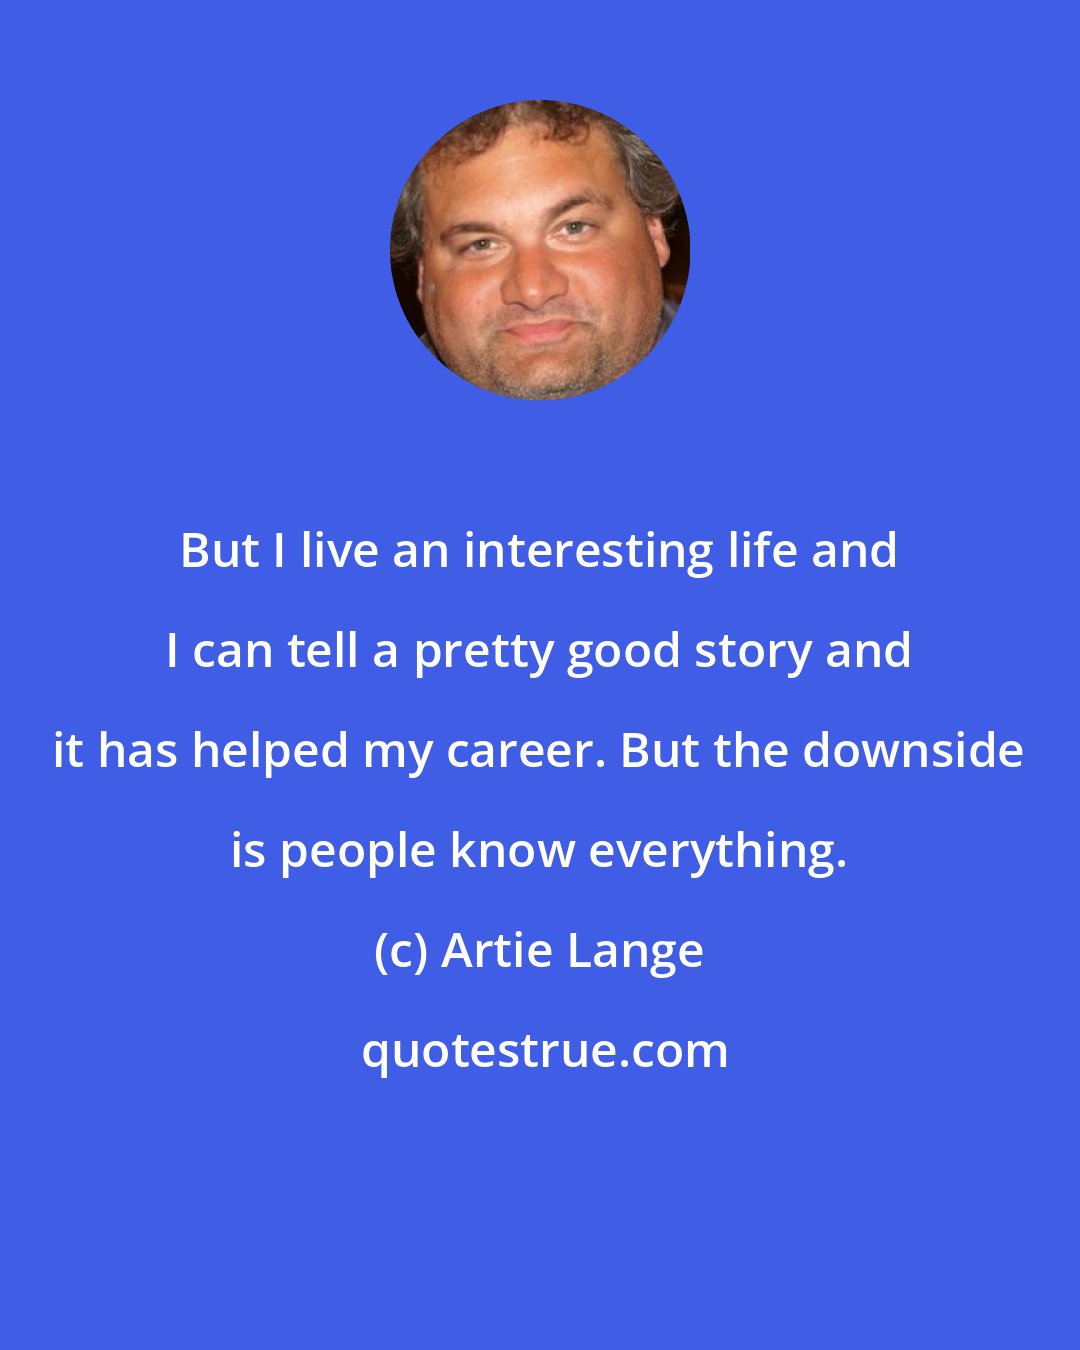 Artie Lange: But I live an interesting life and I can tell a pretty good story and it has helped my career. But the downside is people know everything.